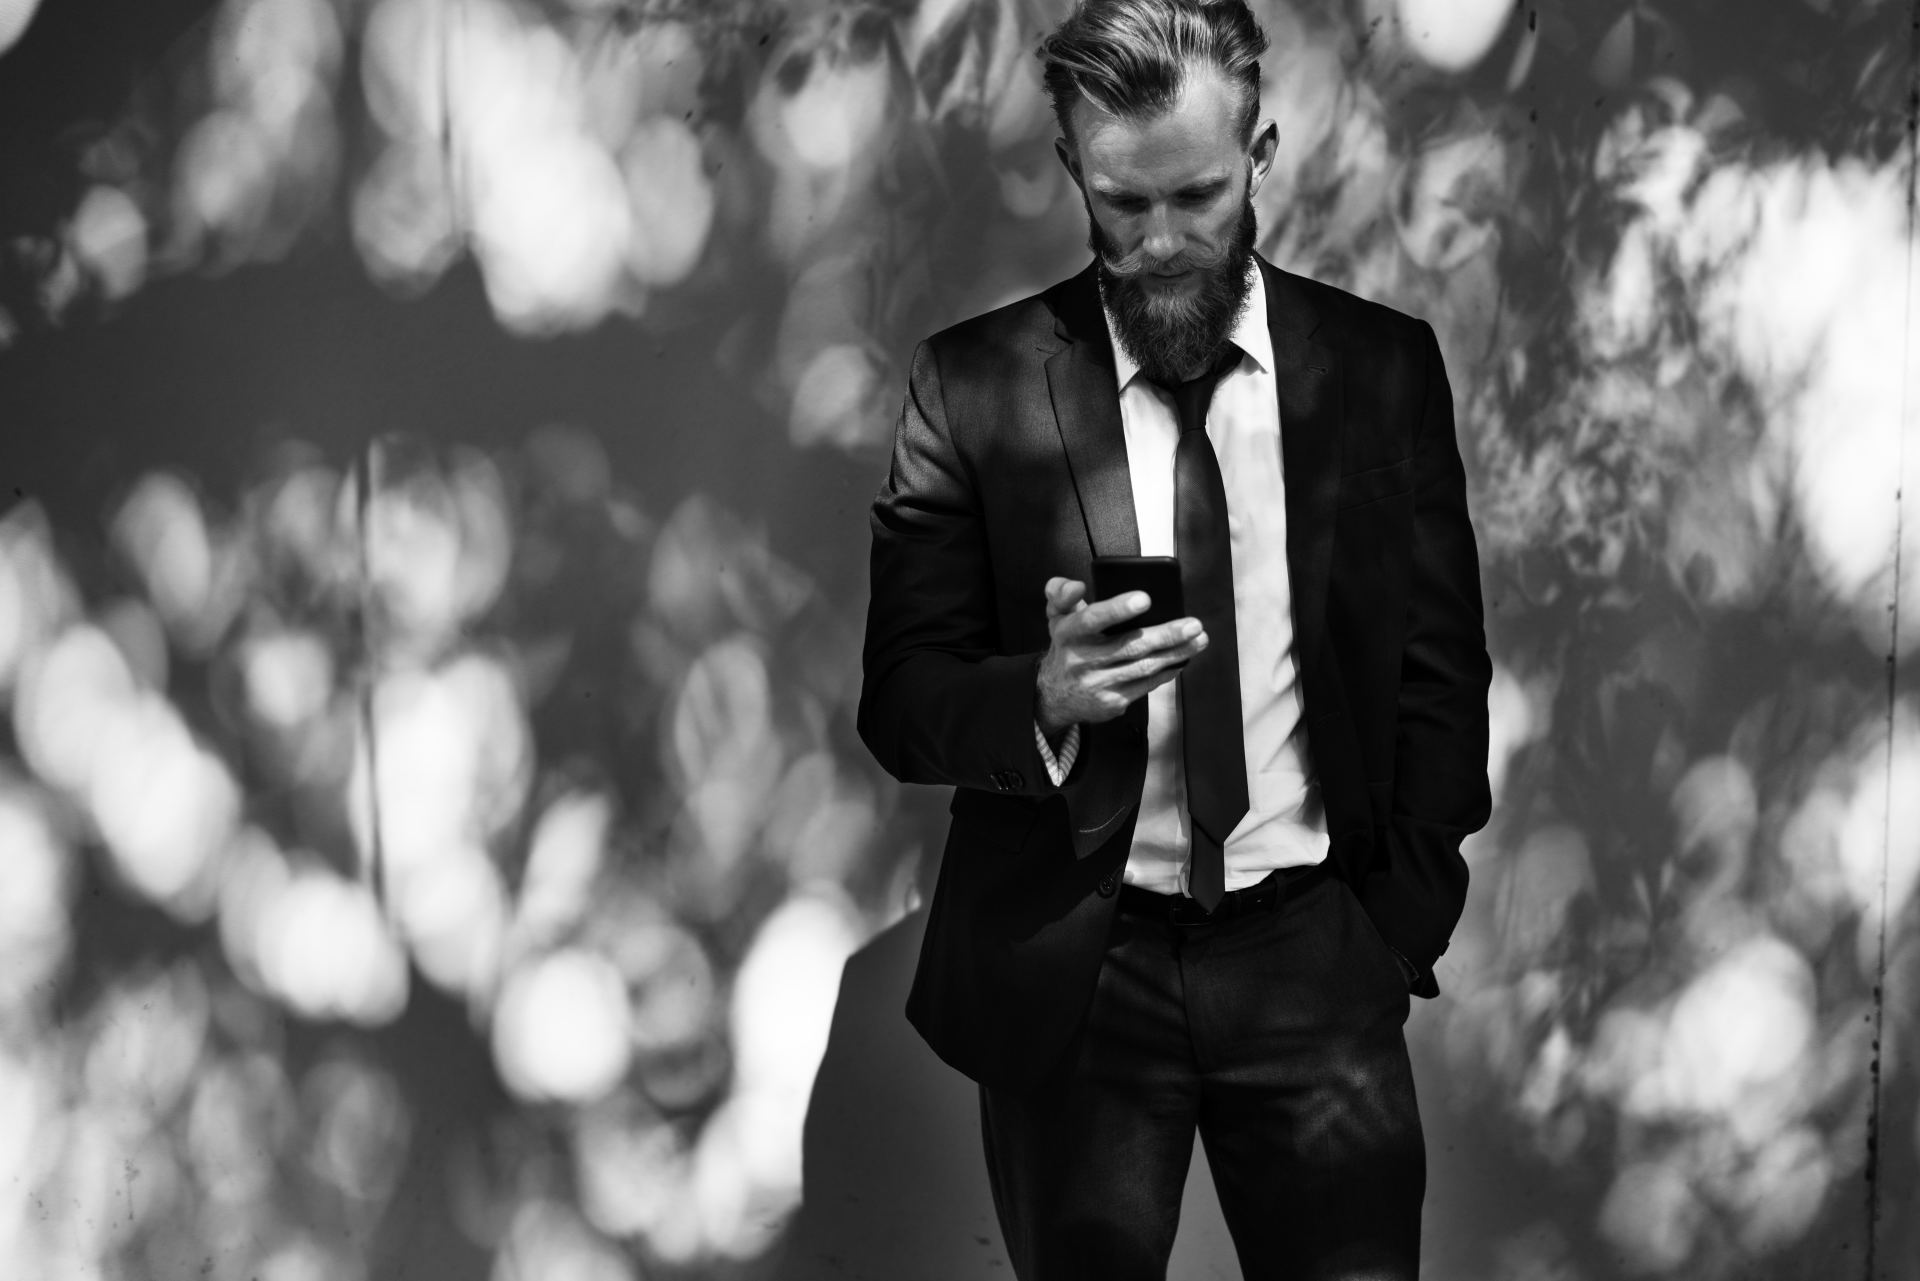 guy looking at his phone searching up information, wearing suit, hand in pocket